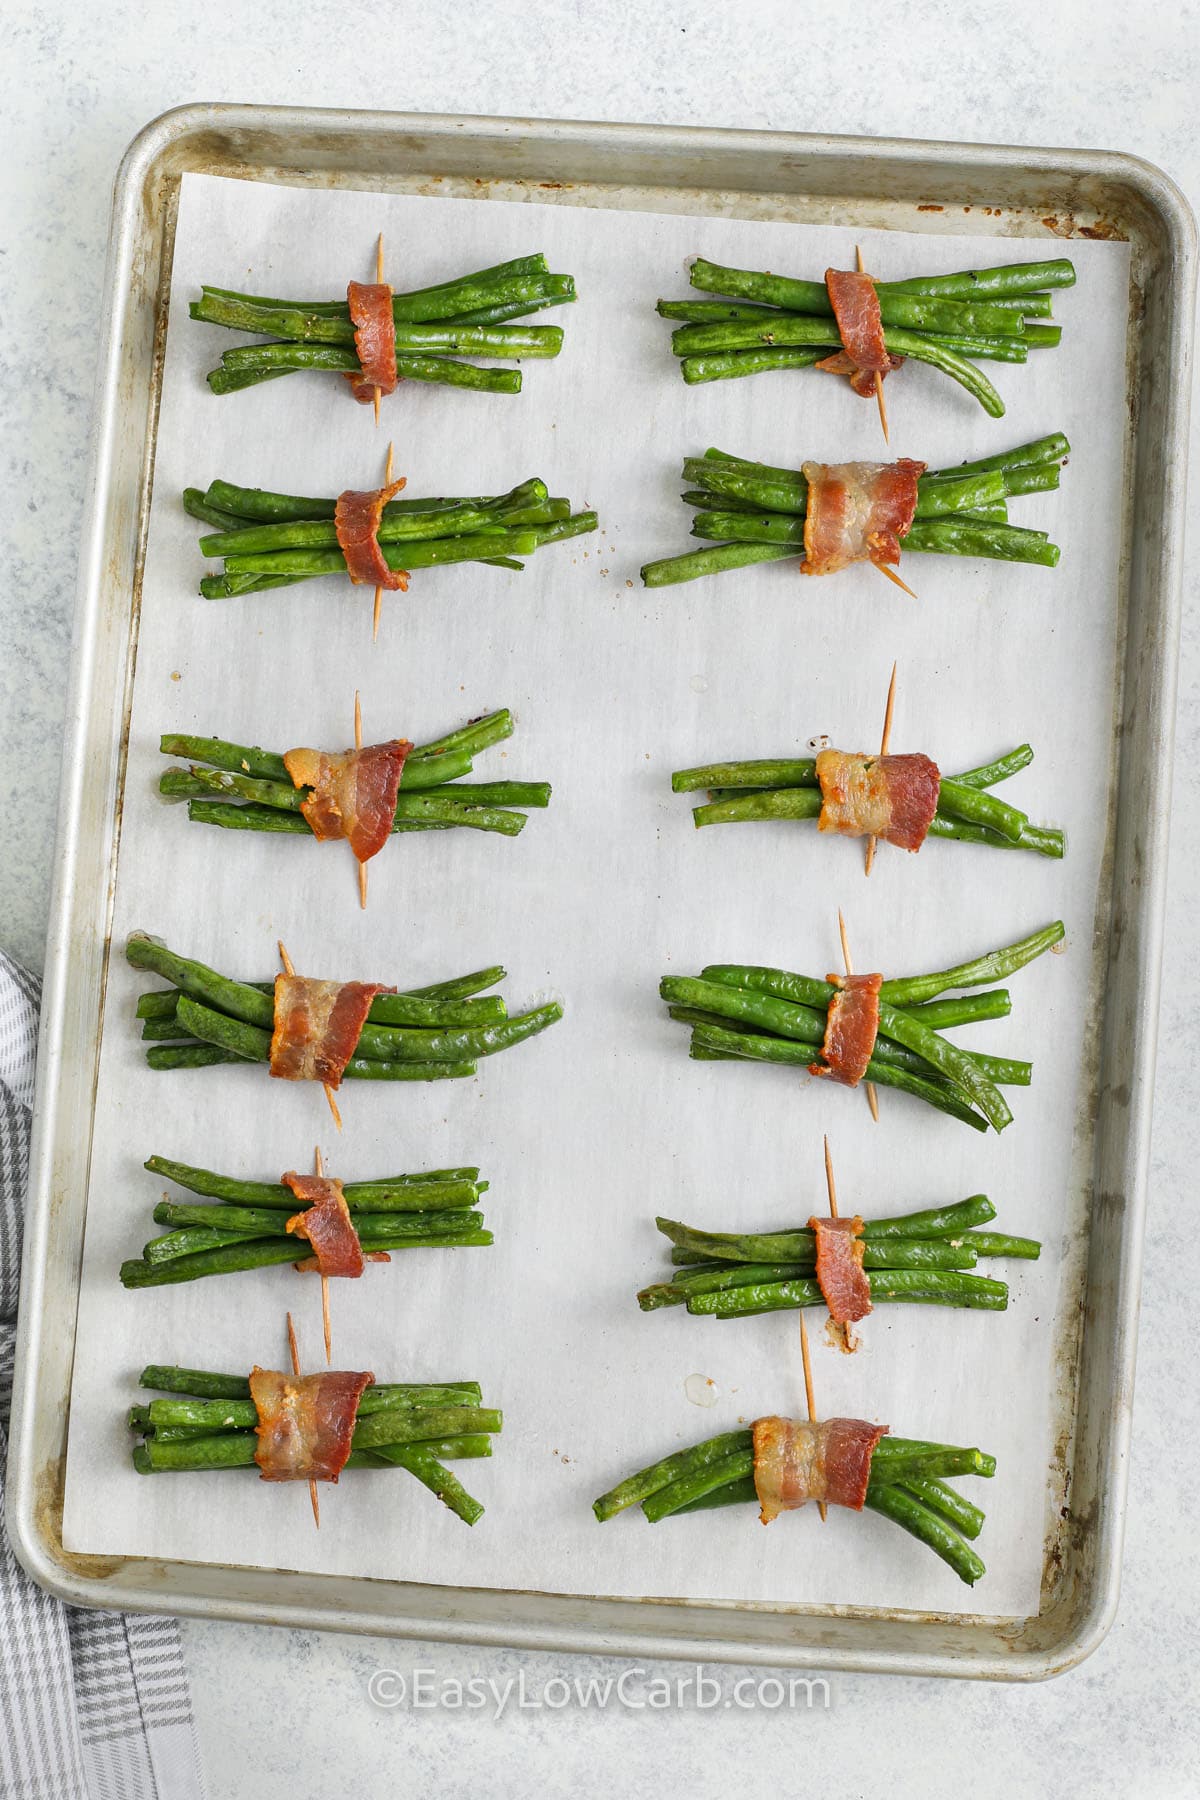 Bacon Wrapped Green Beans cooked on a sheet pan